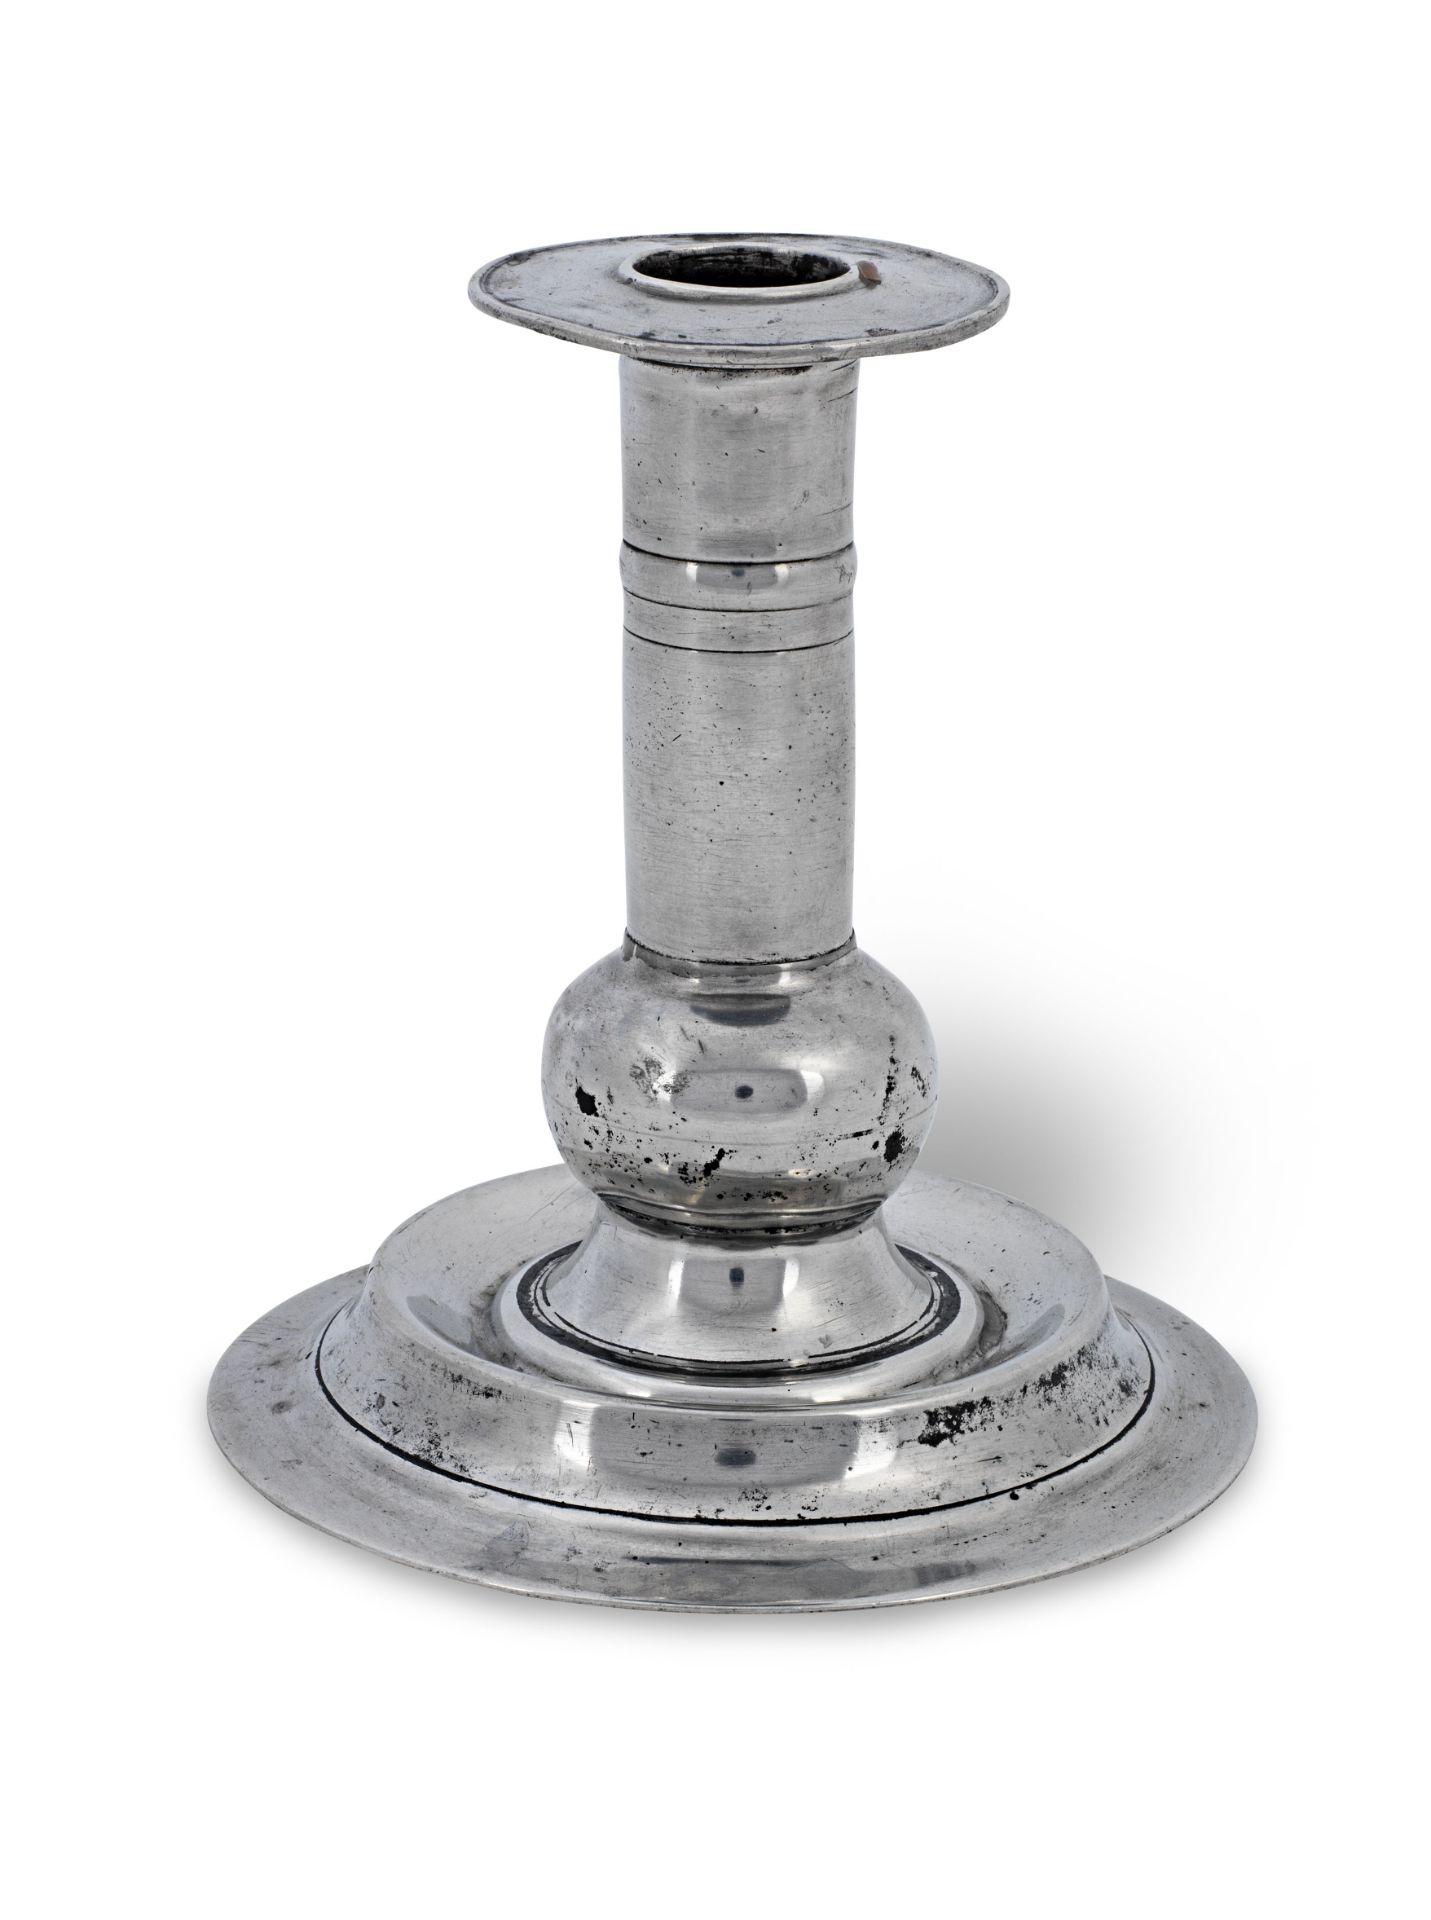 A 17th century pewter ball-knopped candlestick, circa 1650-75